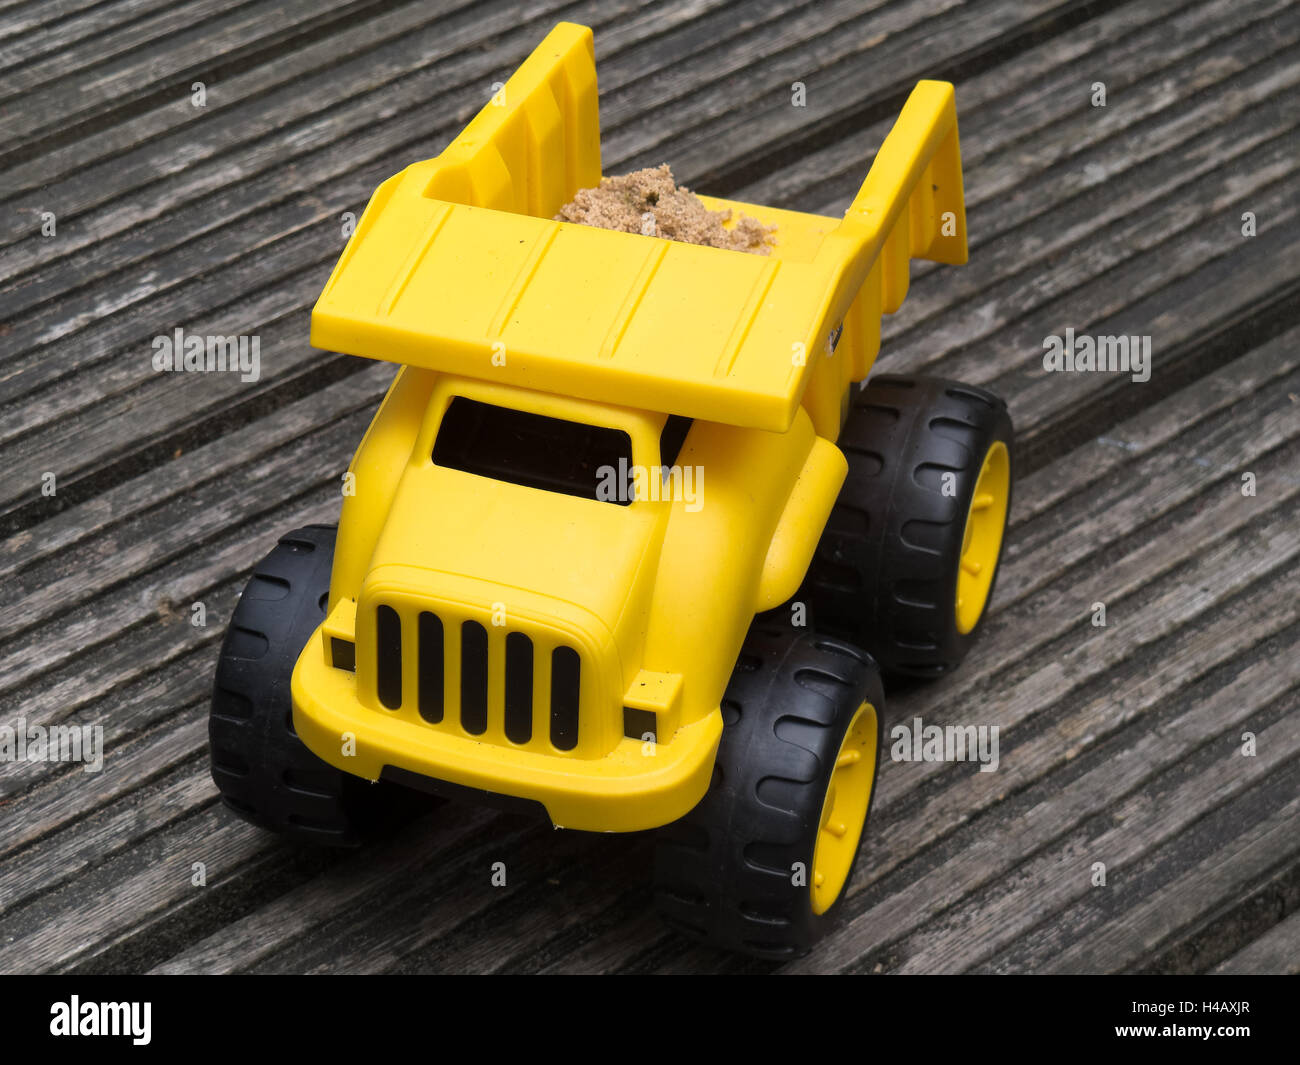 Toy dump truck - Yellow plastic with load of sand on brown wooden background Stock Photo